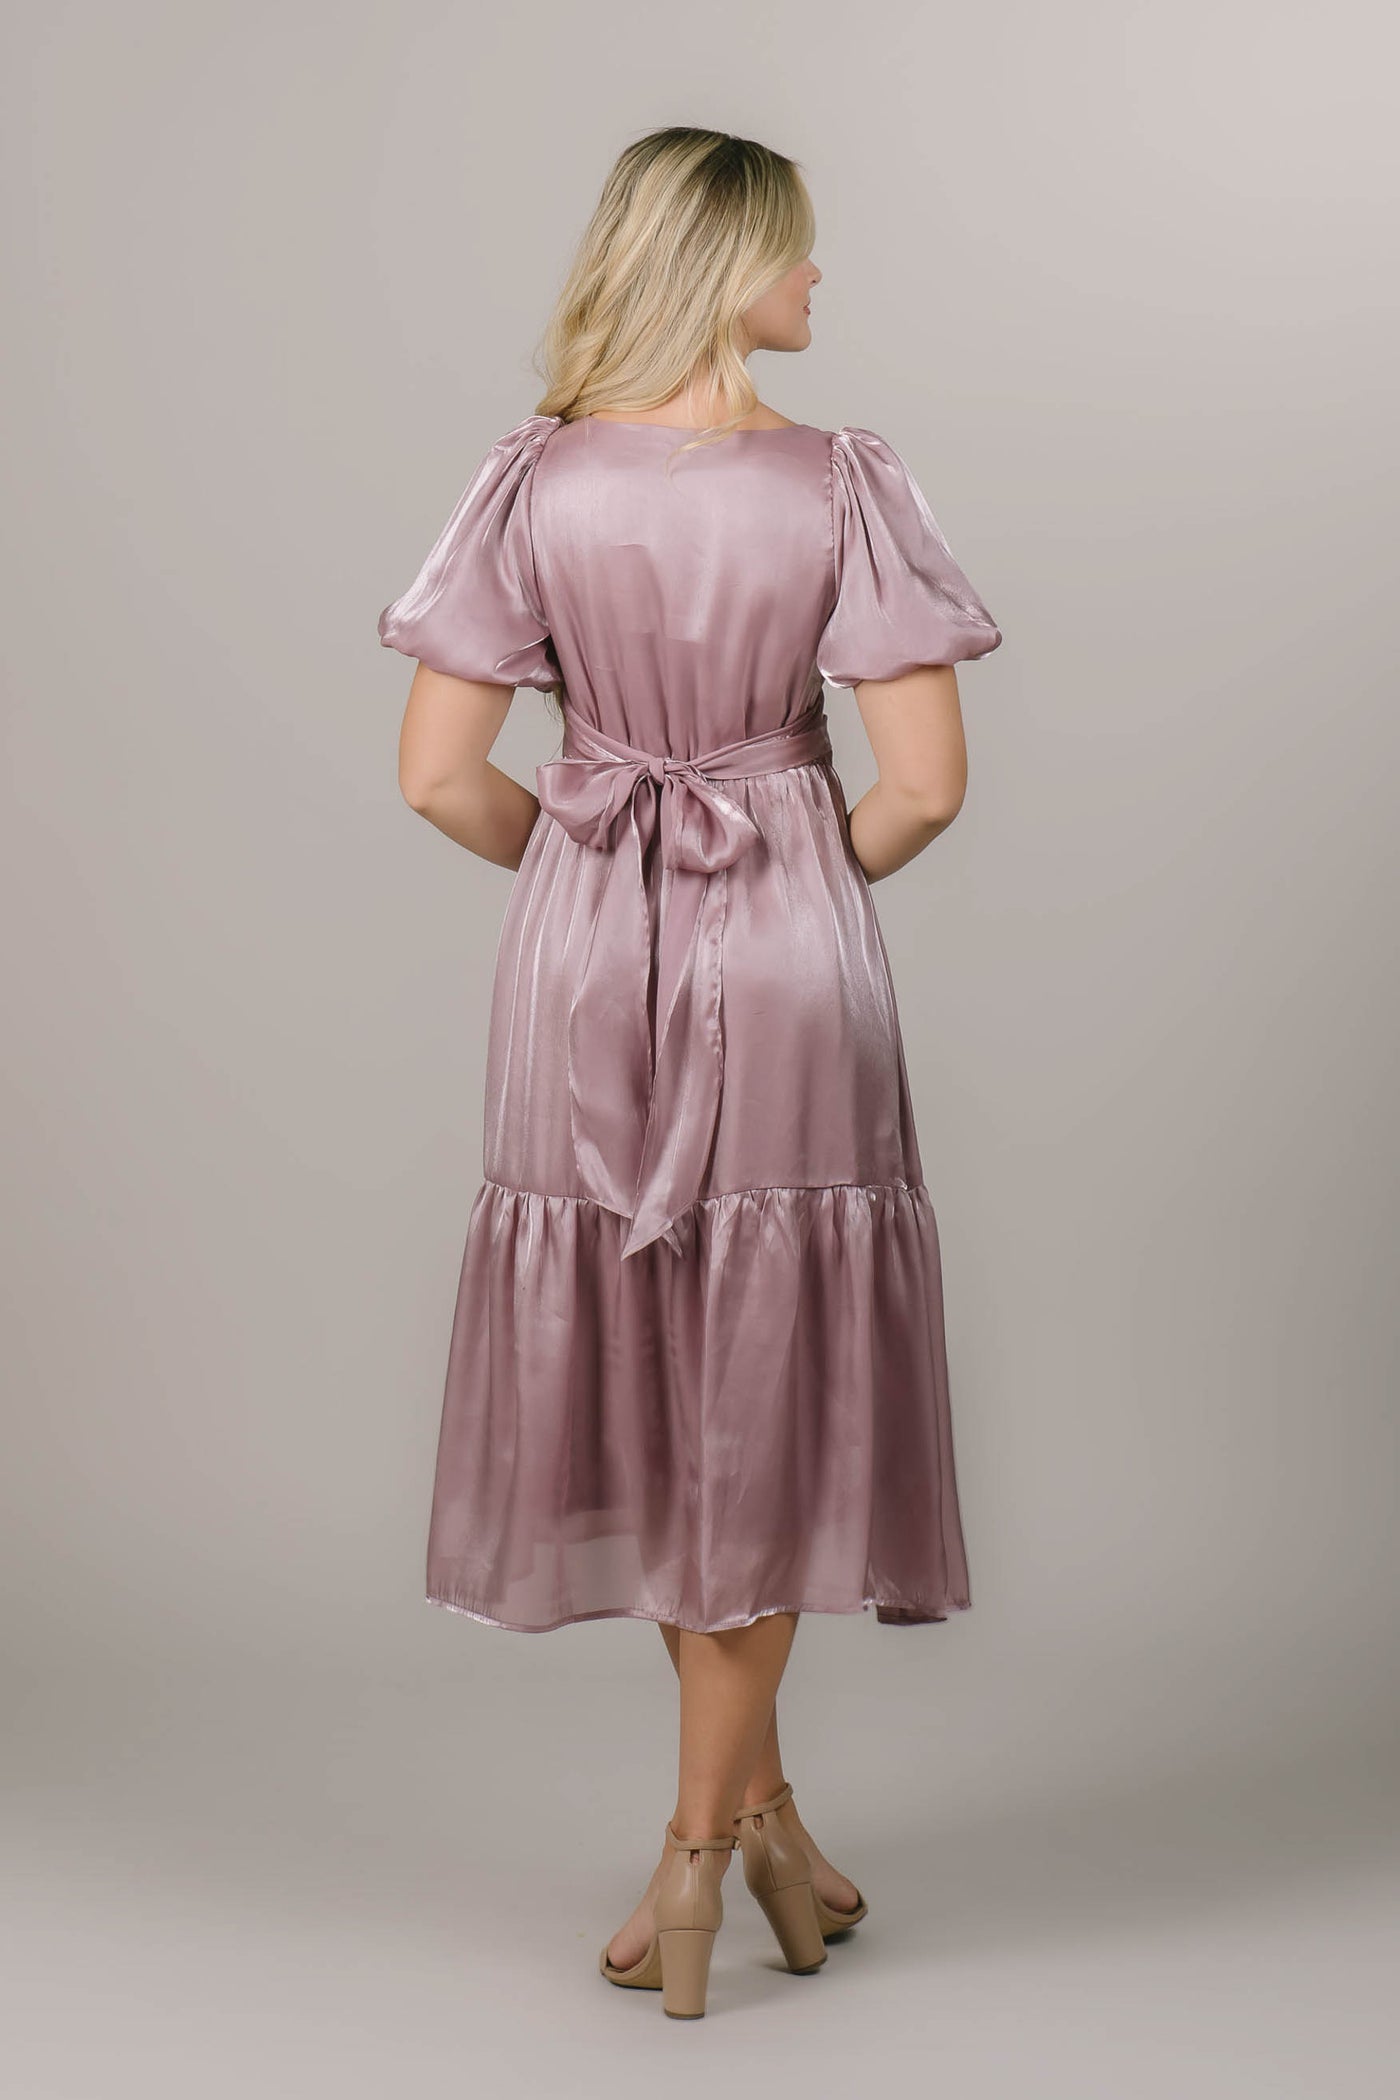 This is a back shot of a modest bridesmaid dress with a bow in the back and a tiered midi skirt.